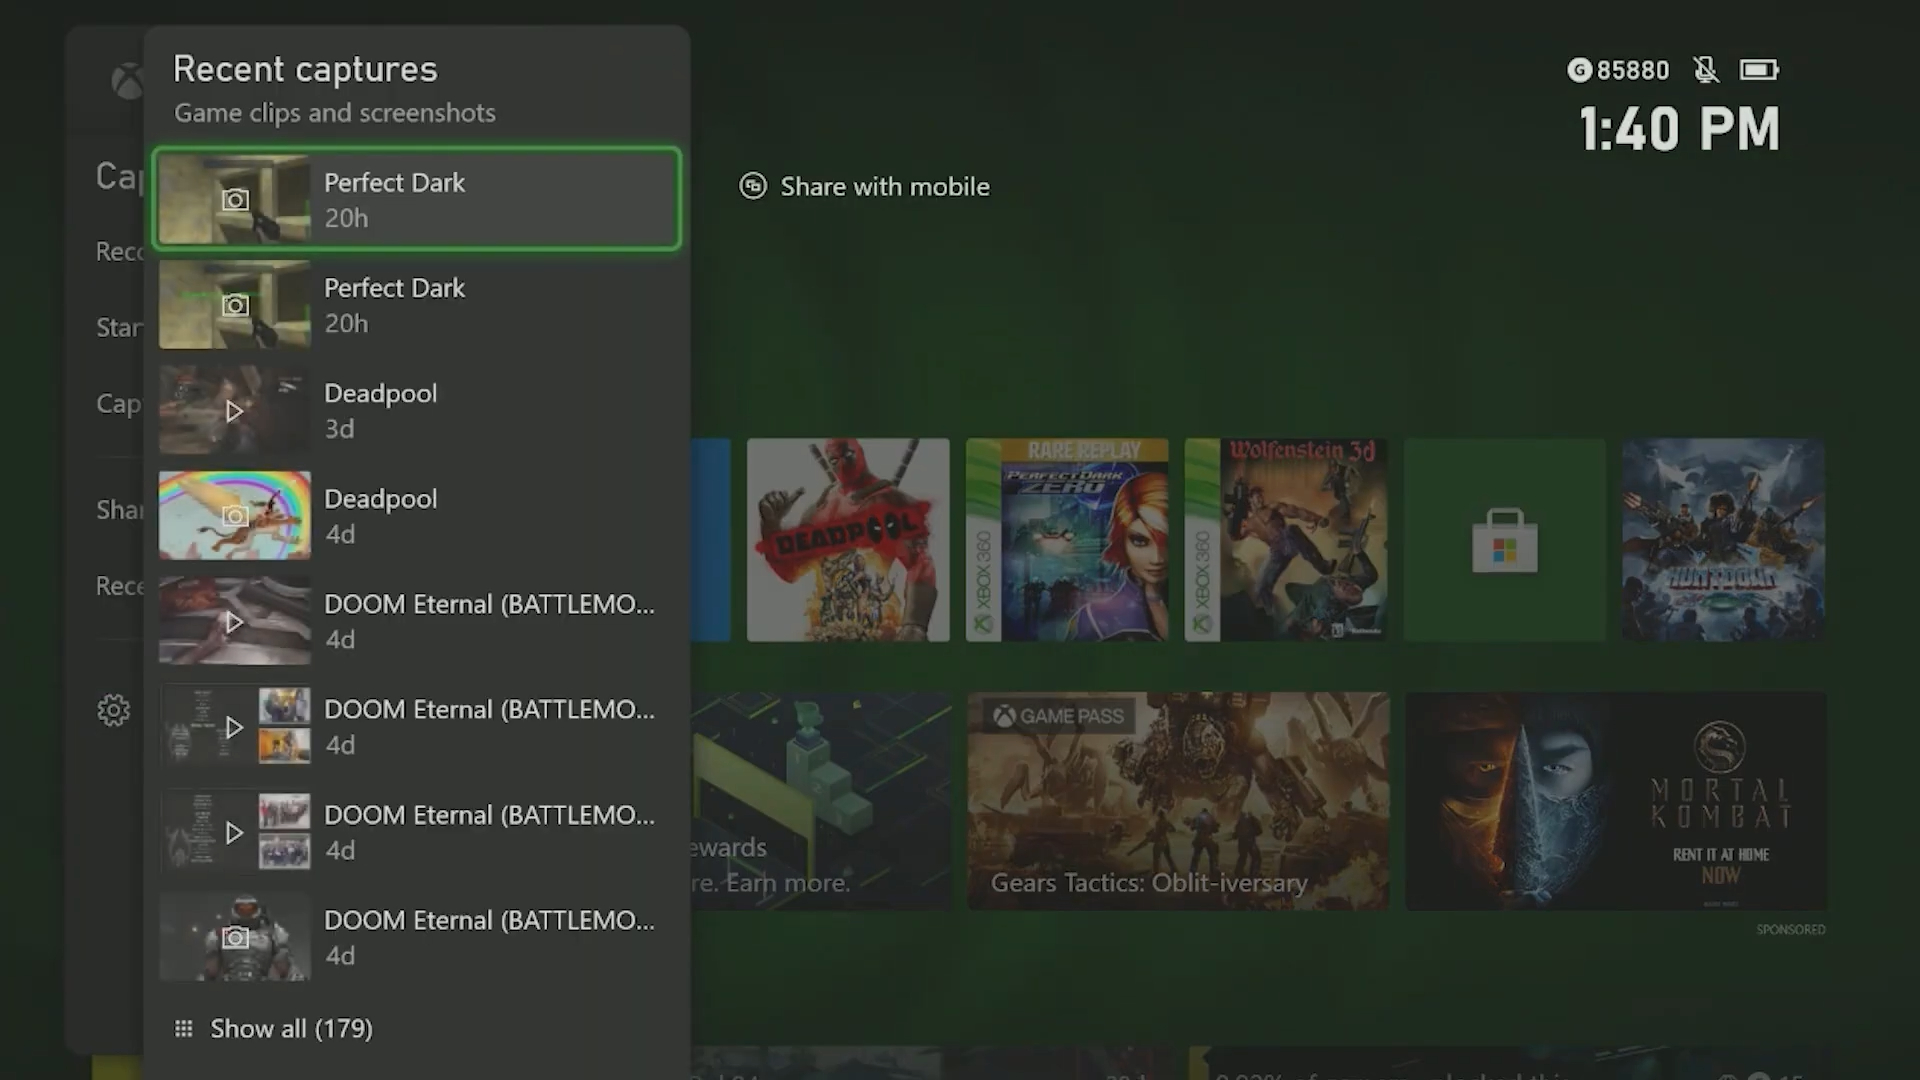 Ochtend Fysica Bedankt How to record a gameplay video on Xbox One | Digital Trends